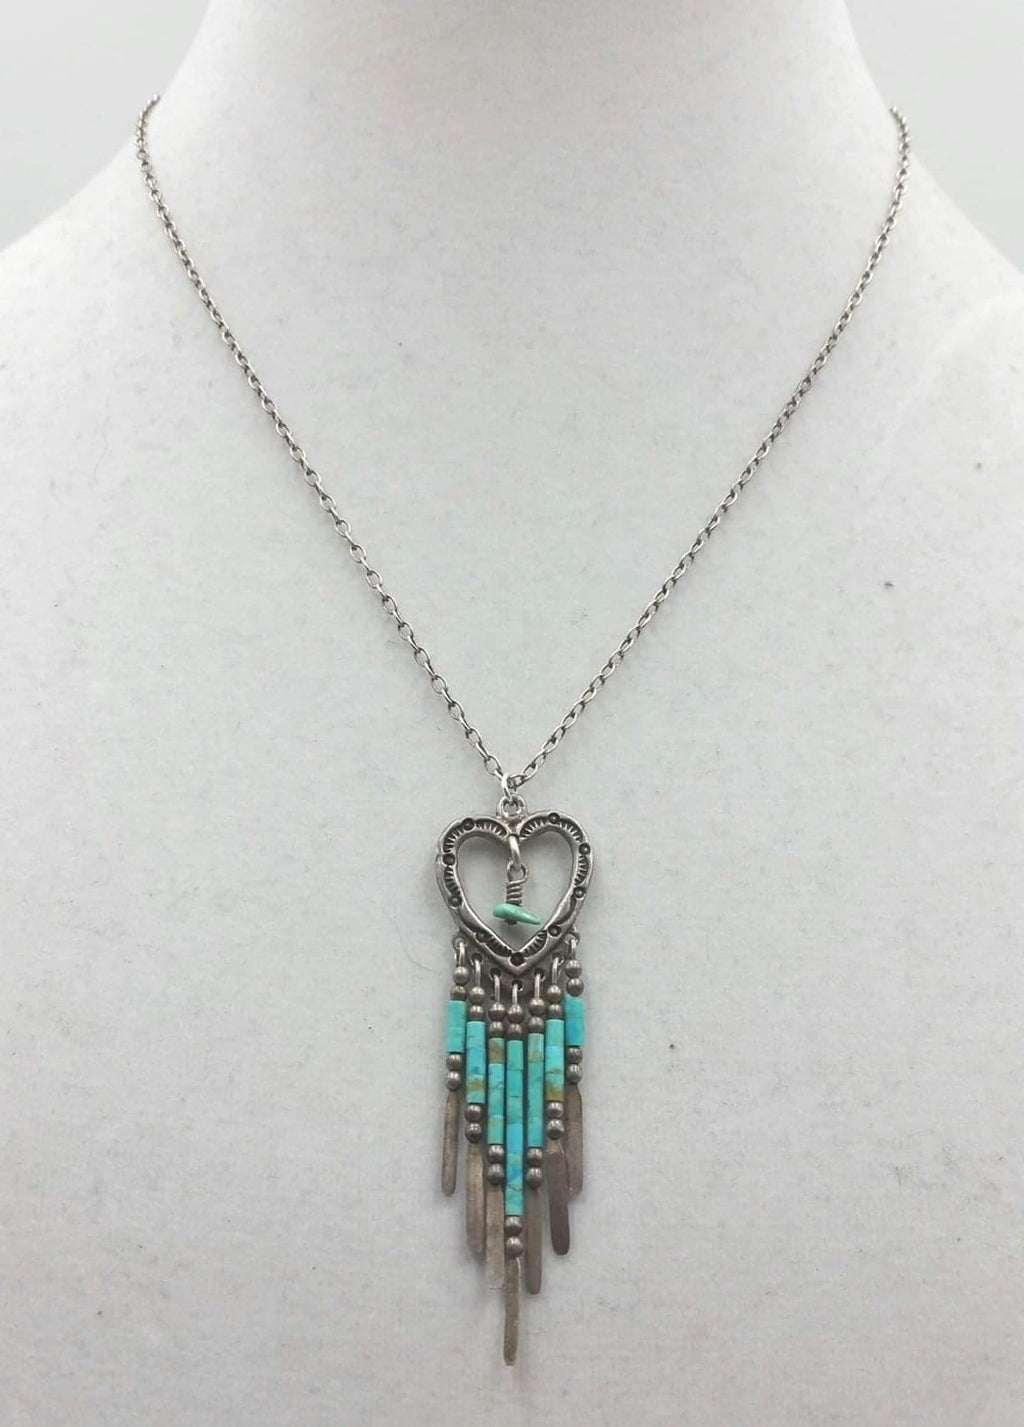 Past Work - Looking for a vegan gift for your favorite Valentine? This one-of-a-kind necklace might just be that perfect gift for the person that wants. 18" length. SOLD.